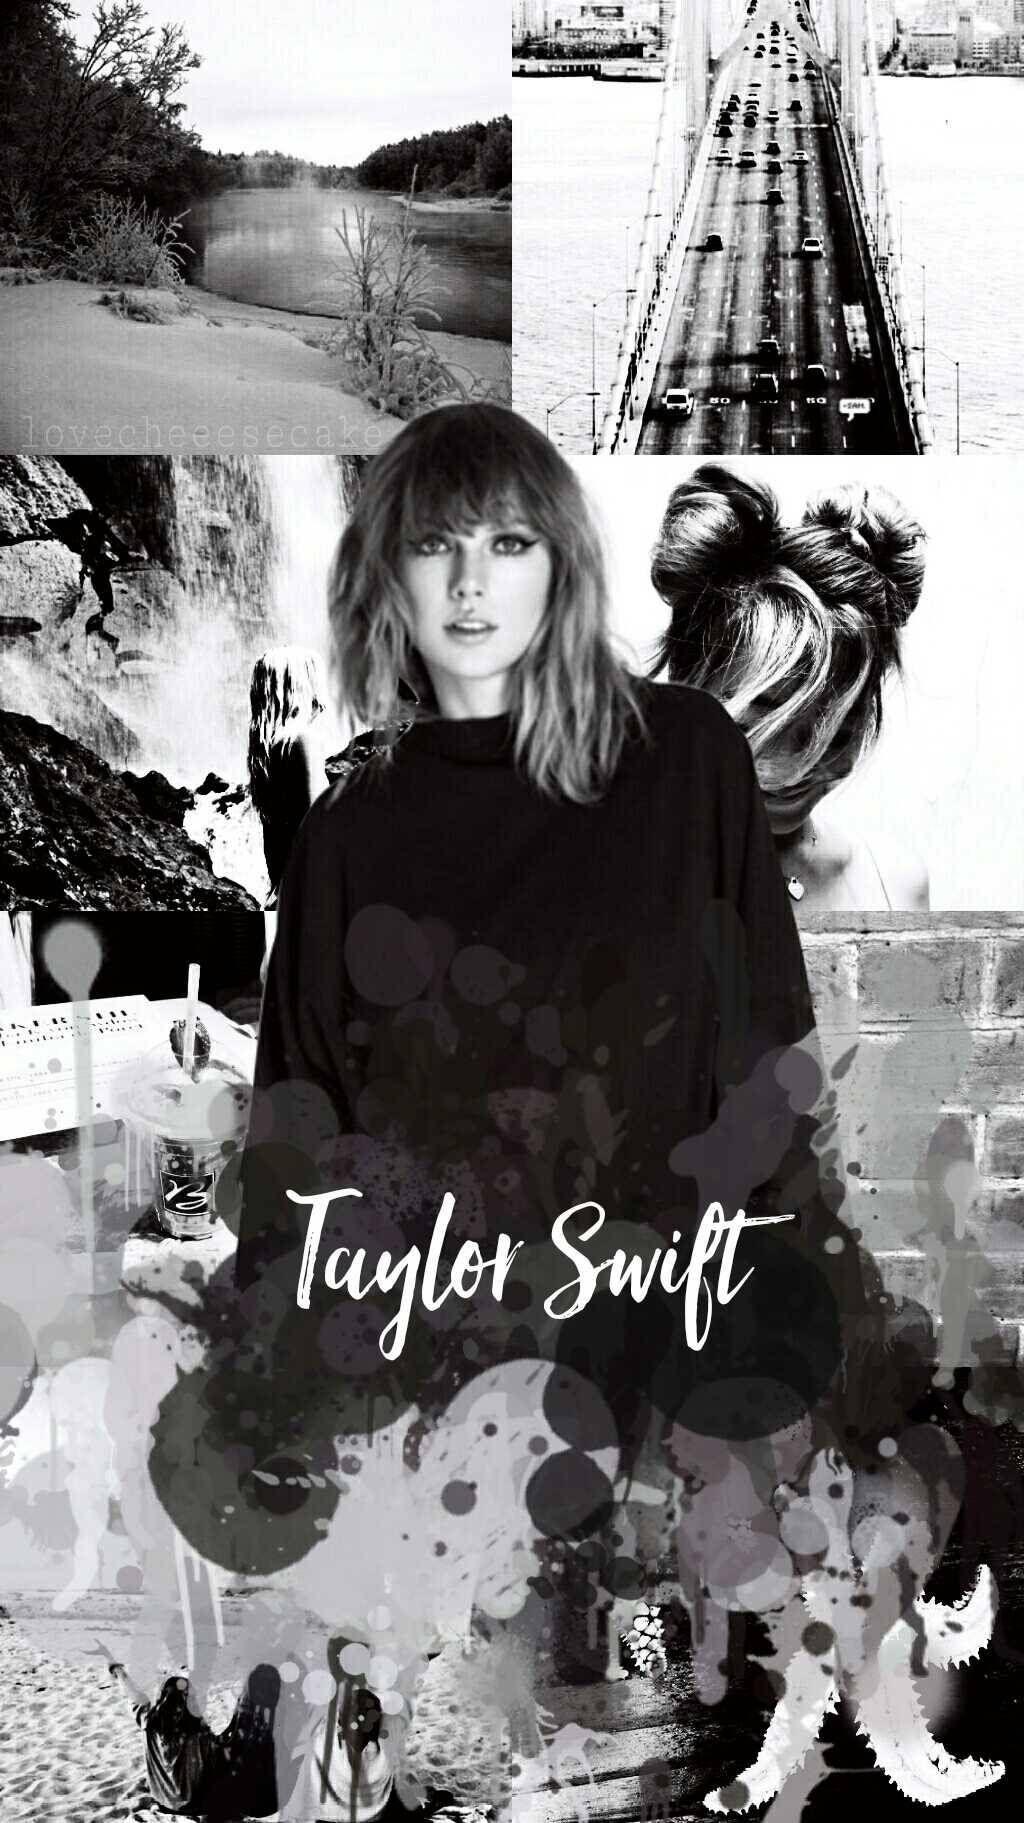 Taylor Swift Reputation Wallpapers Wallpaper Cave